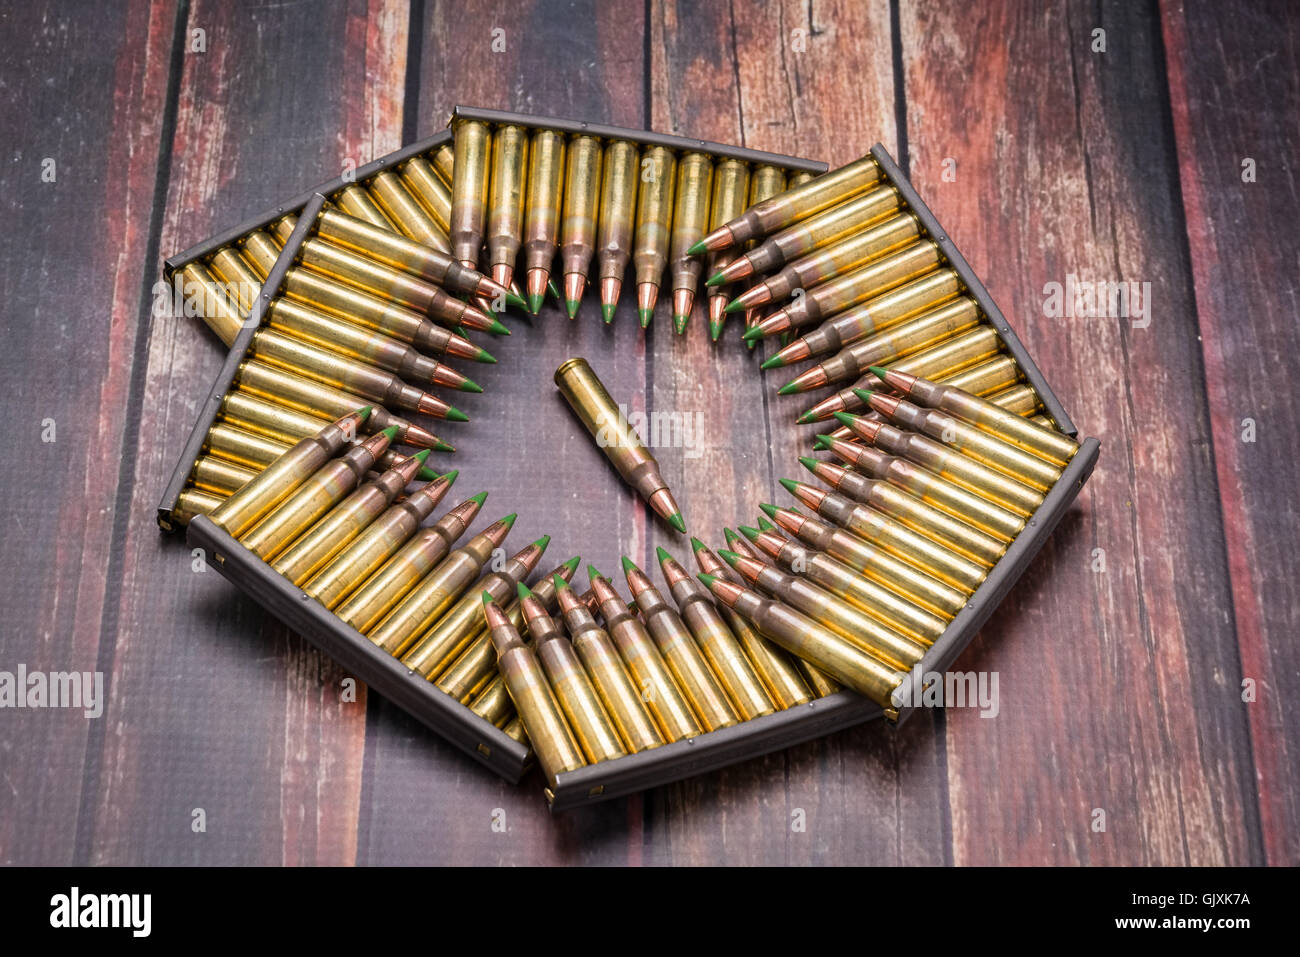 Ammunition, .223/556, arrange in a pattern the shape of the Pentagon on dark wood surface. Stock Photo